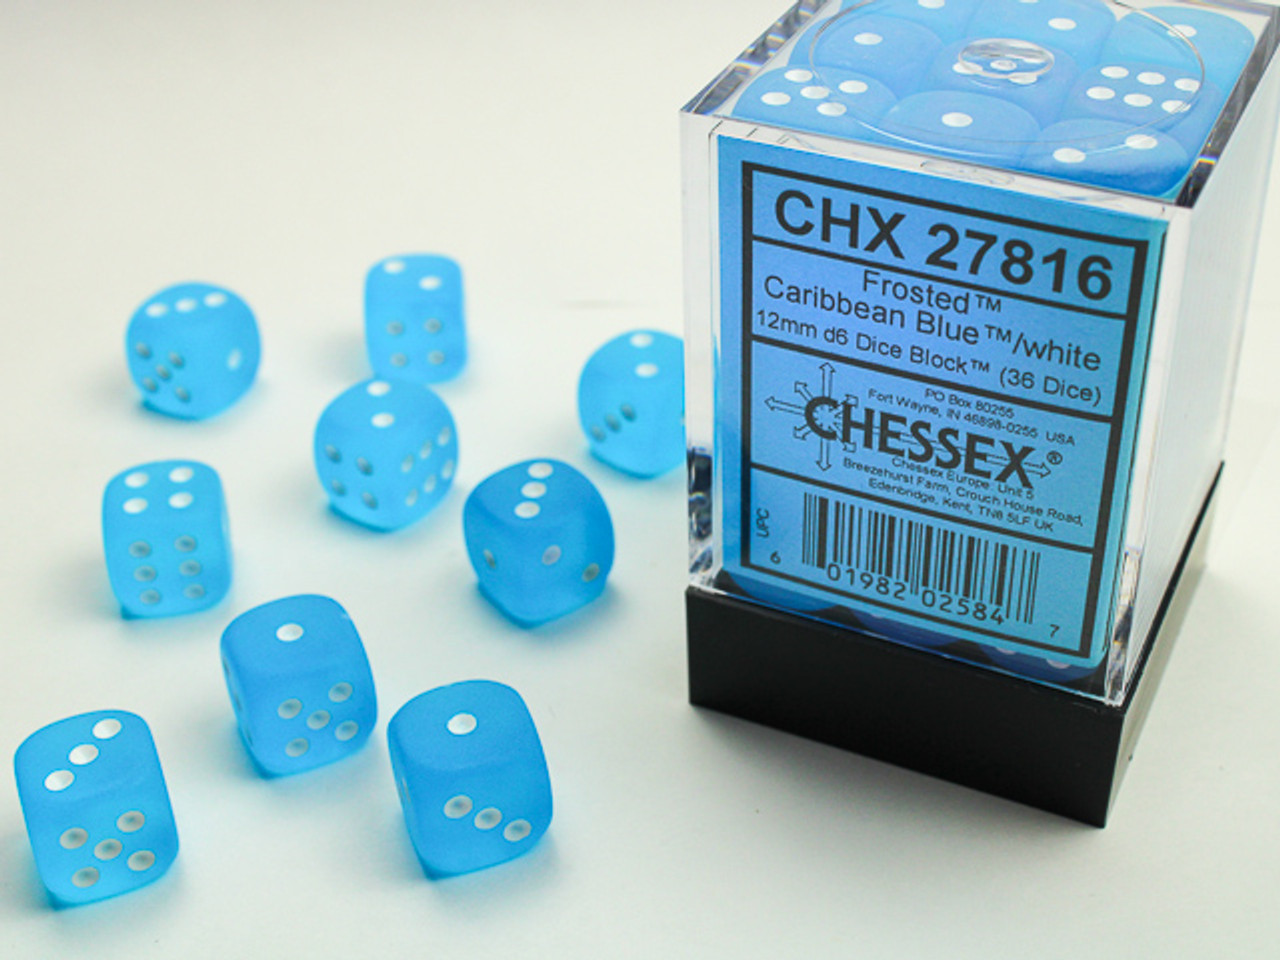 27816 - Frosted™ 12mm d6 Caribbean Blue™/white Dice Block™ (36 dice)